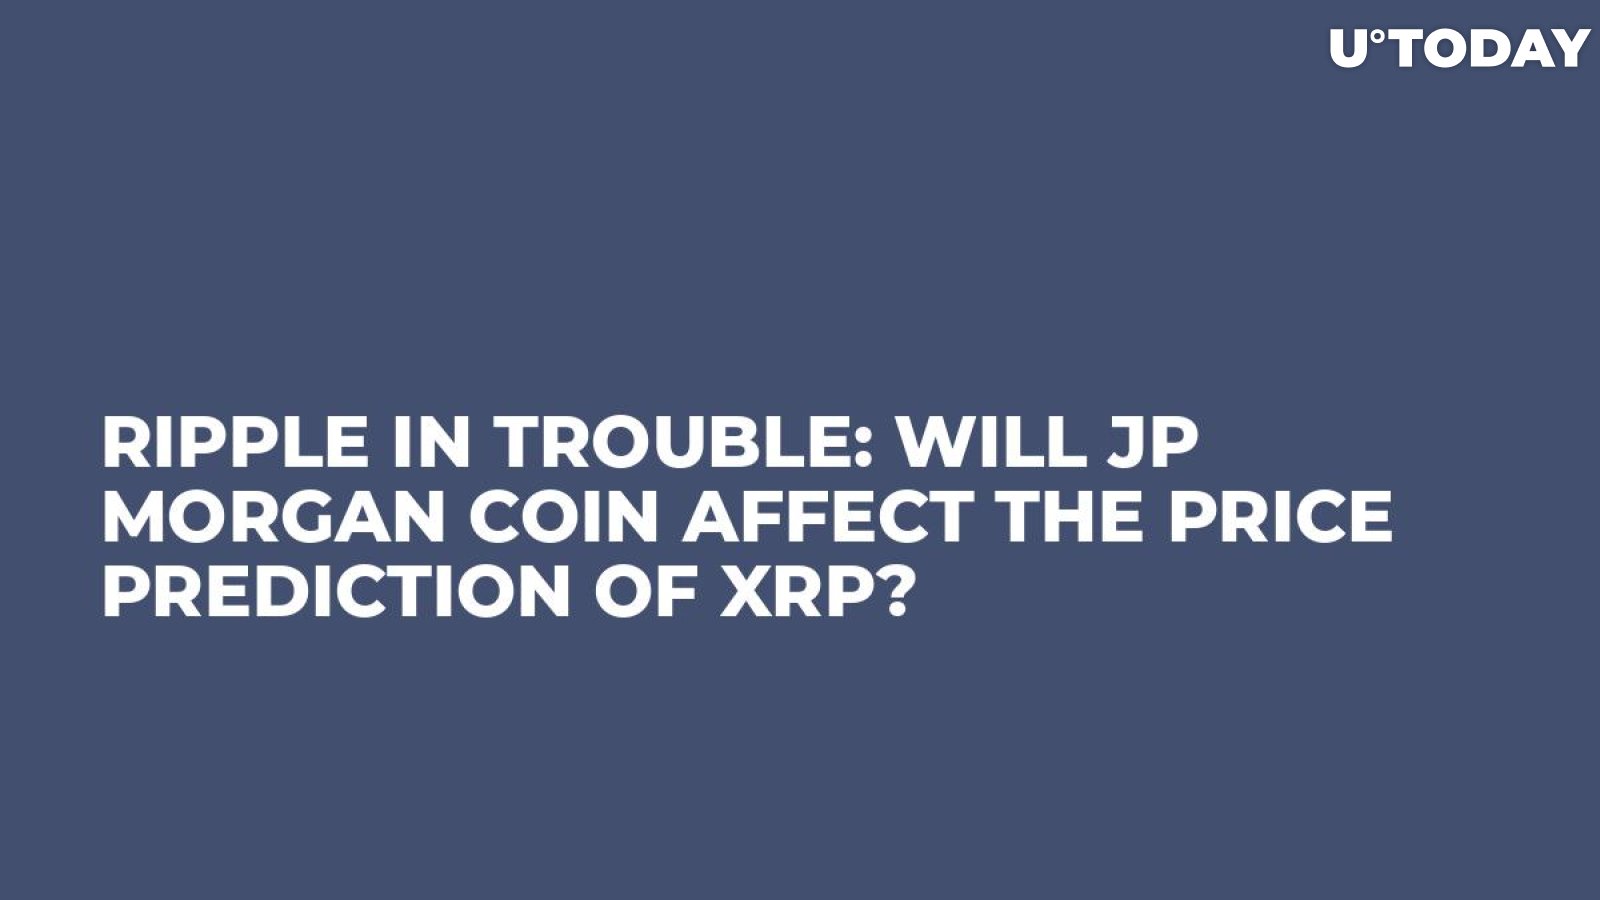 Ripple in Trouble: Will JP Morgan Coin Affect the Price Prediction of XRP?